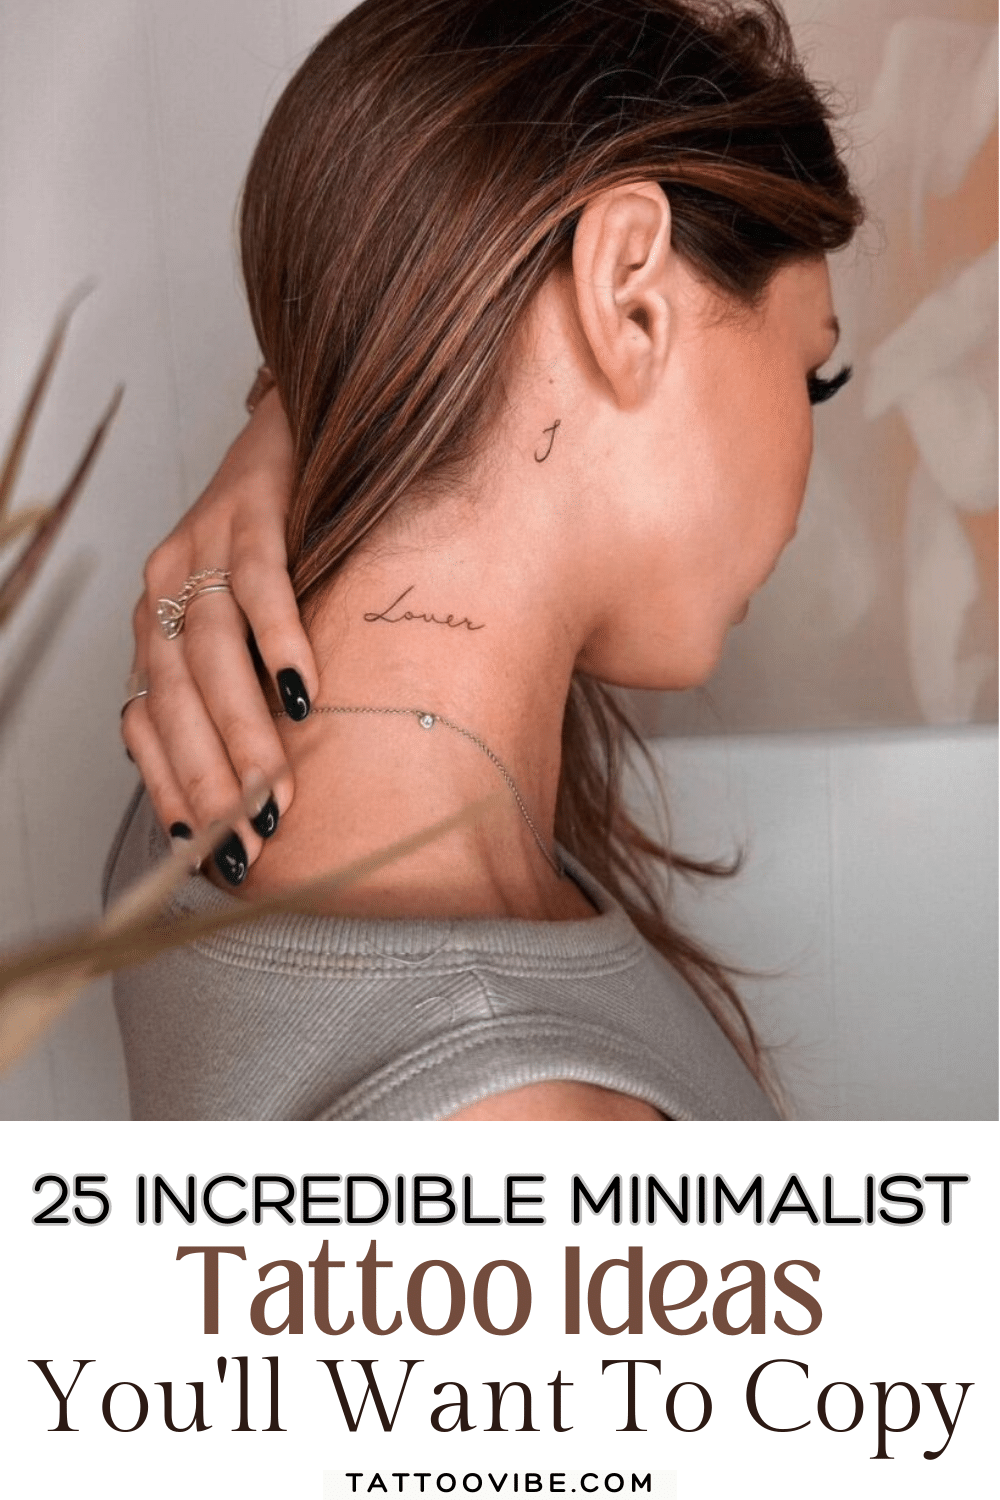 25 Incredible Minimalist Tattoo Ideas You’ll Want To Copy